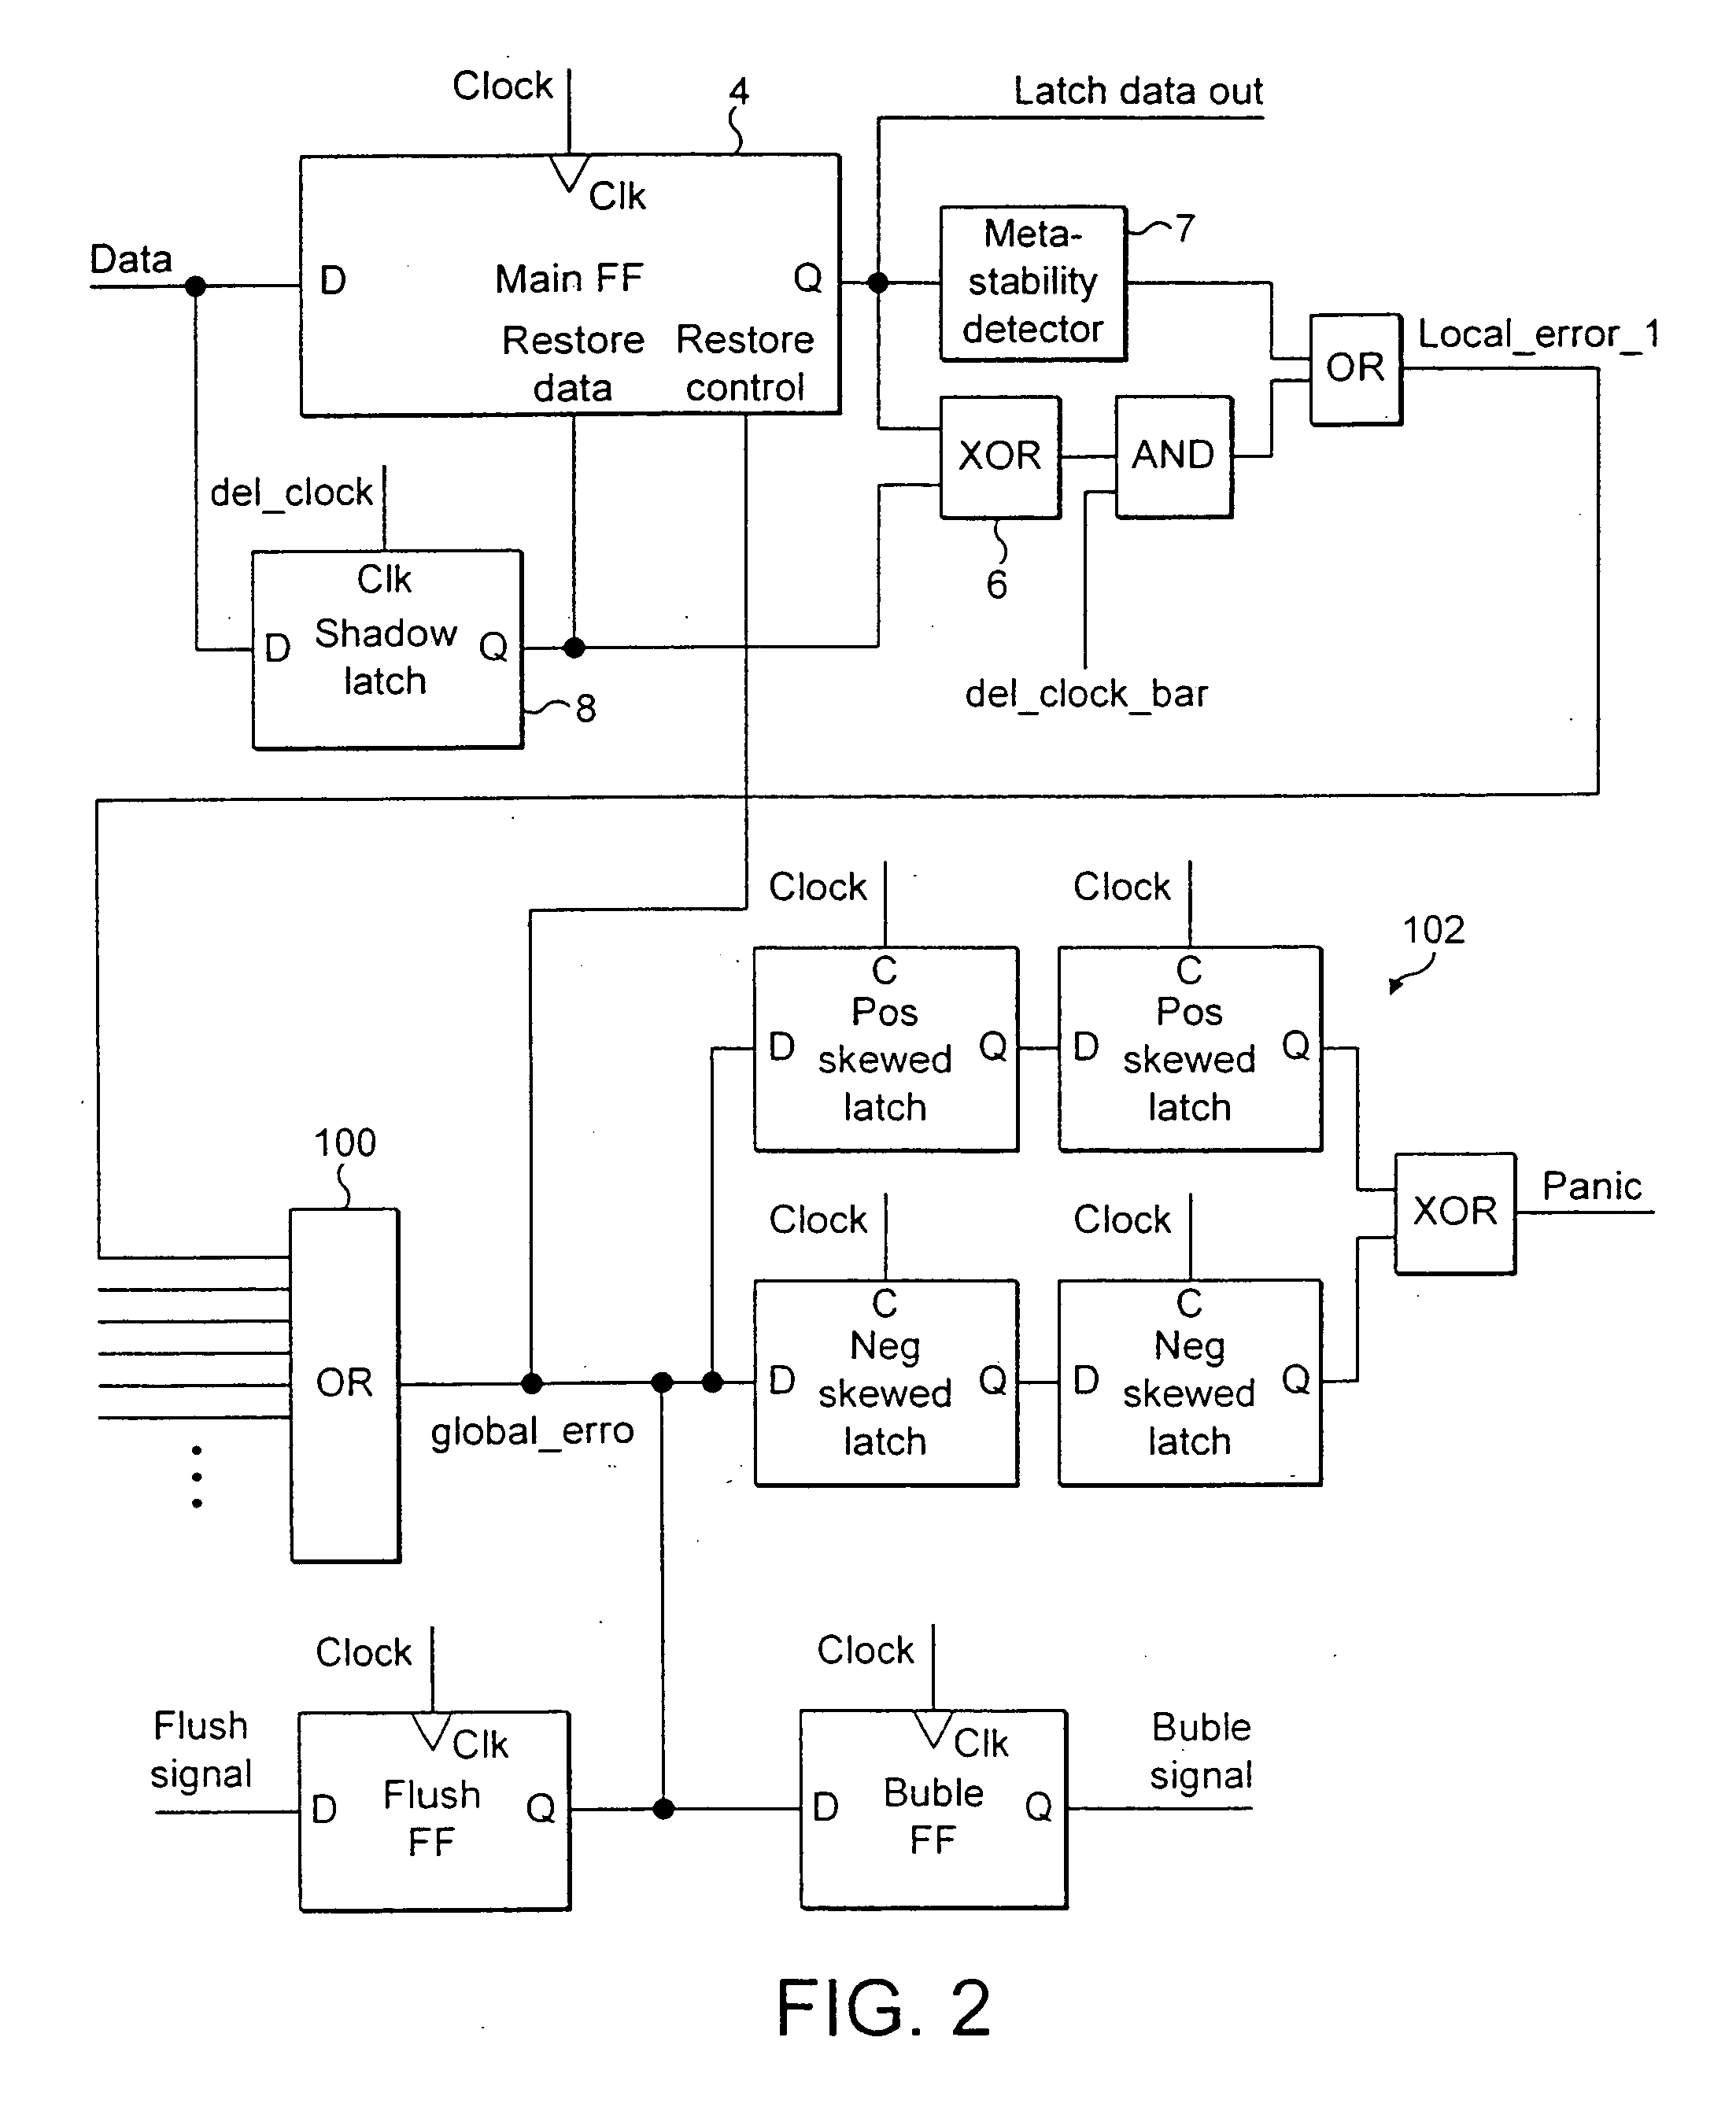 Systematic and random error detection and recovery within processing stages of an integrated circuit